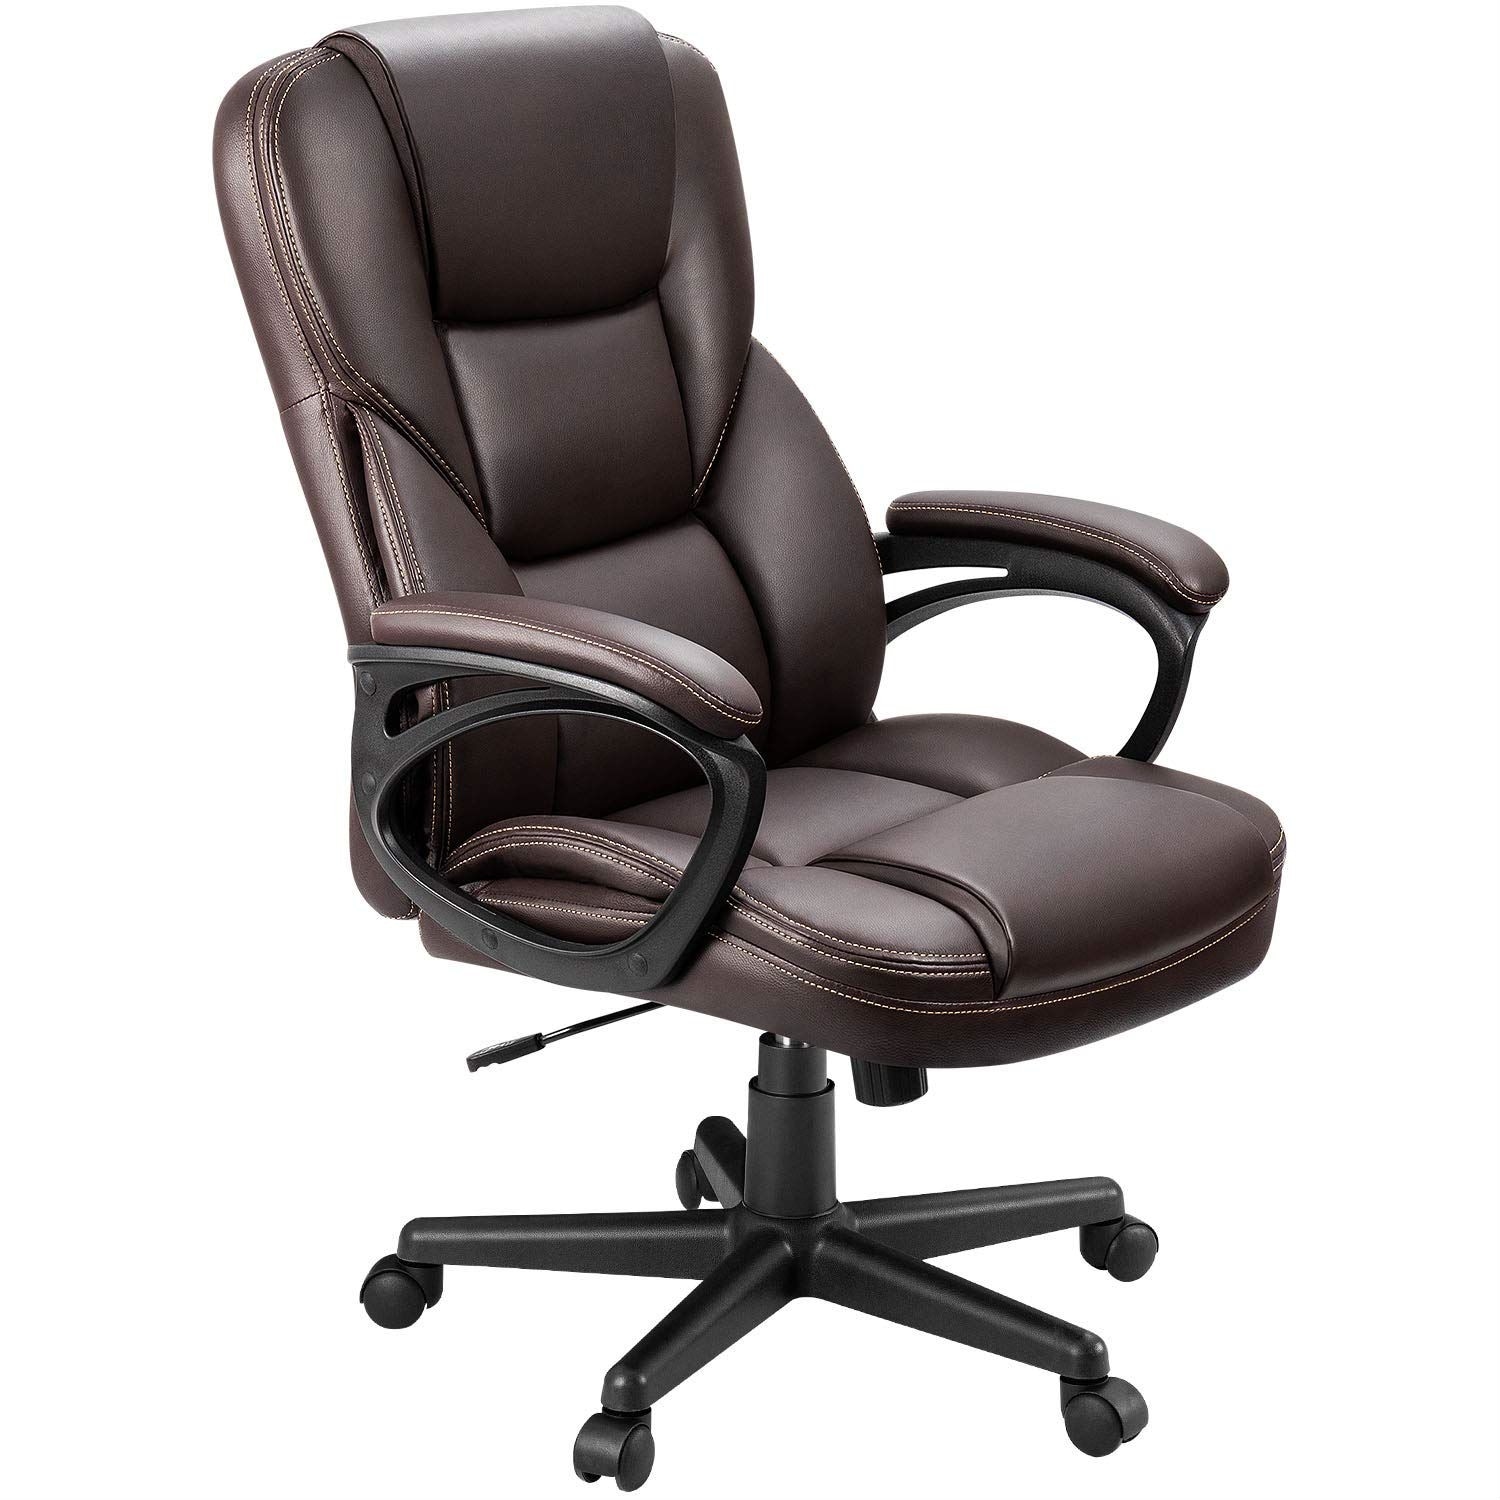 Homestock Gray High Back Executive Premium Faux Leather Office Chair with Back Support, Armrest and Lumbar Support